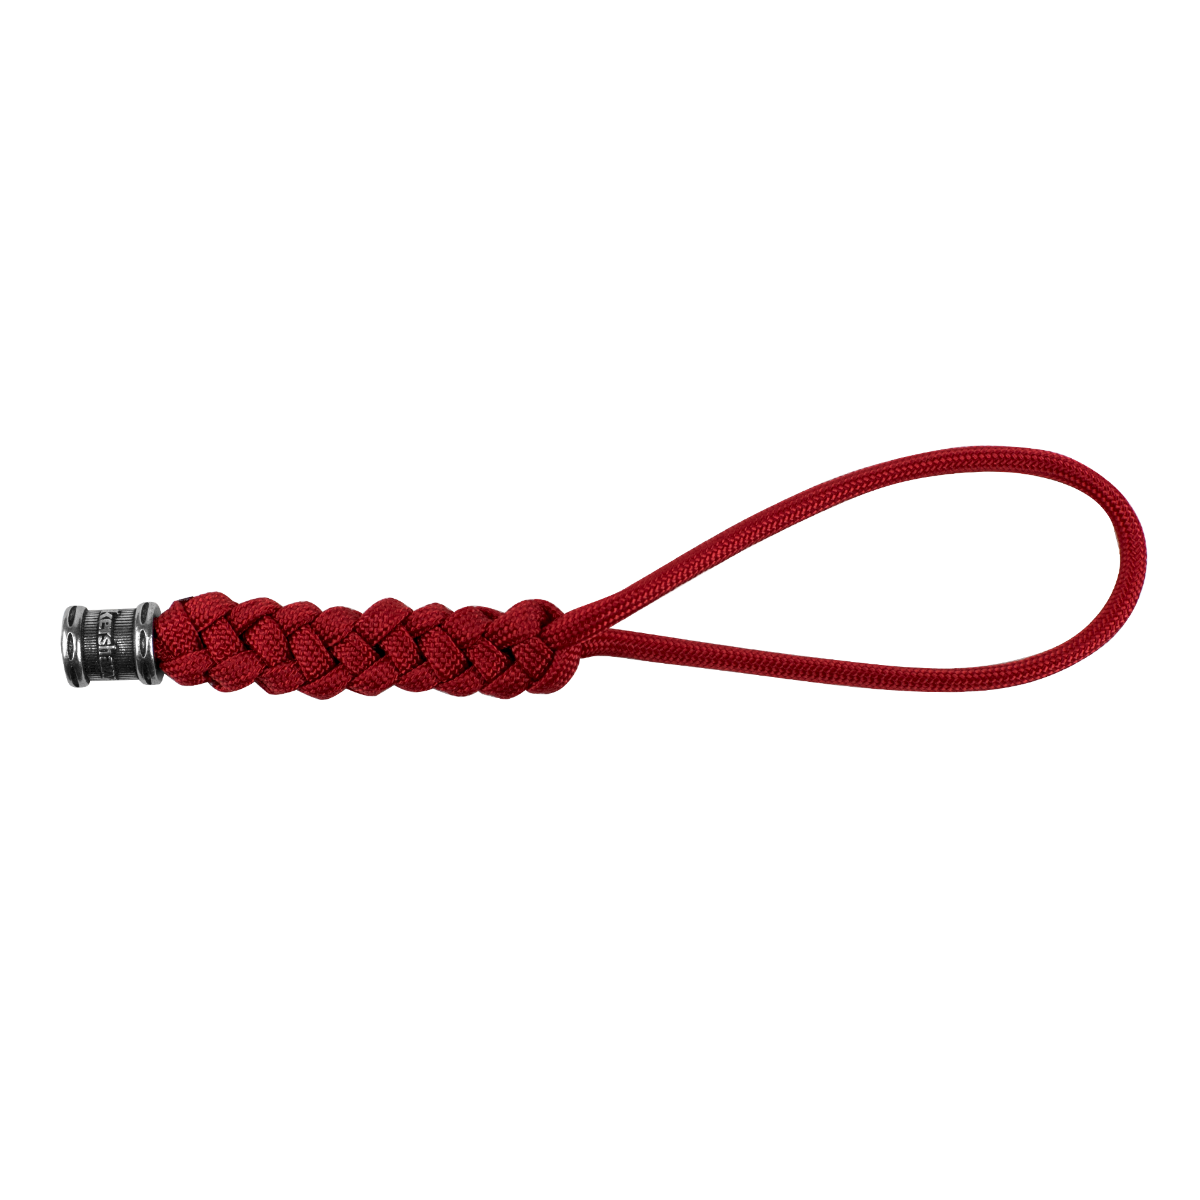 Kershaw Knife Lanyard Red with Bead - Aussie Outback Supplies